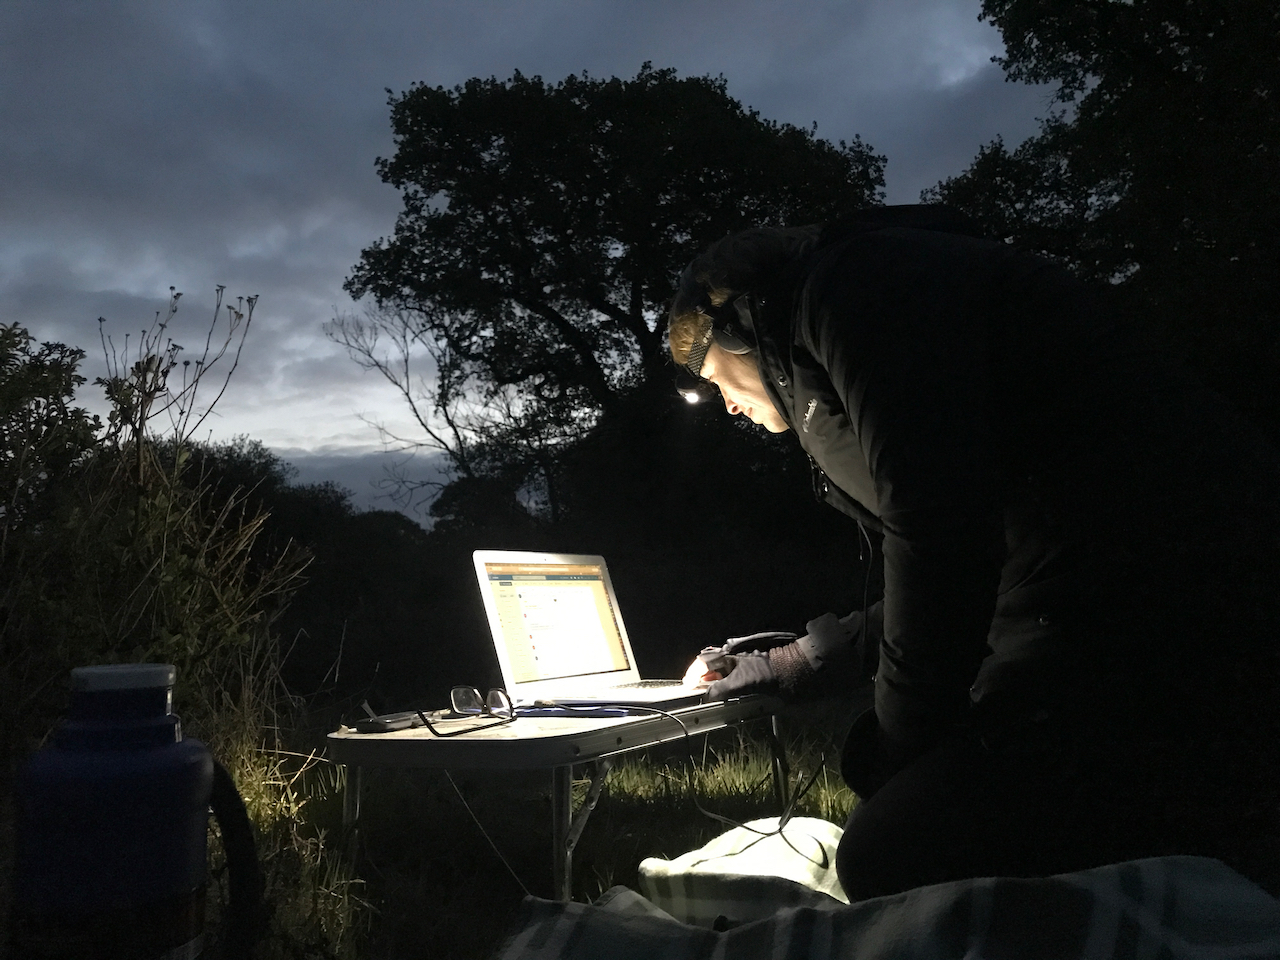 Hazel is livestreaming from teh Knepp scrubland using her laptop and helped by a head torch. The sky is lightening behind her